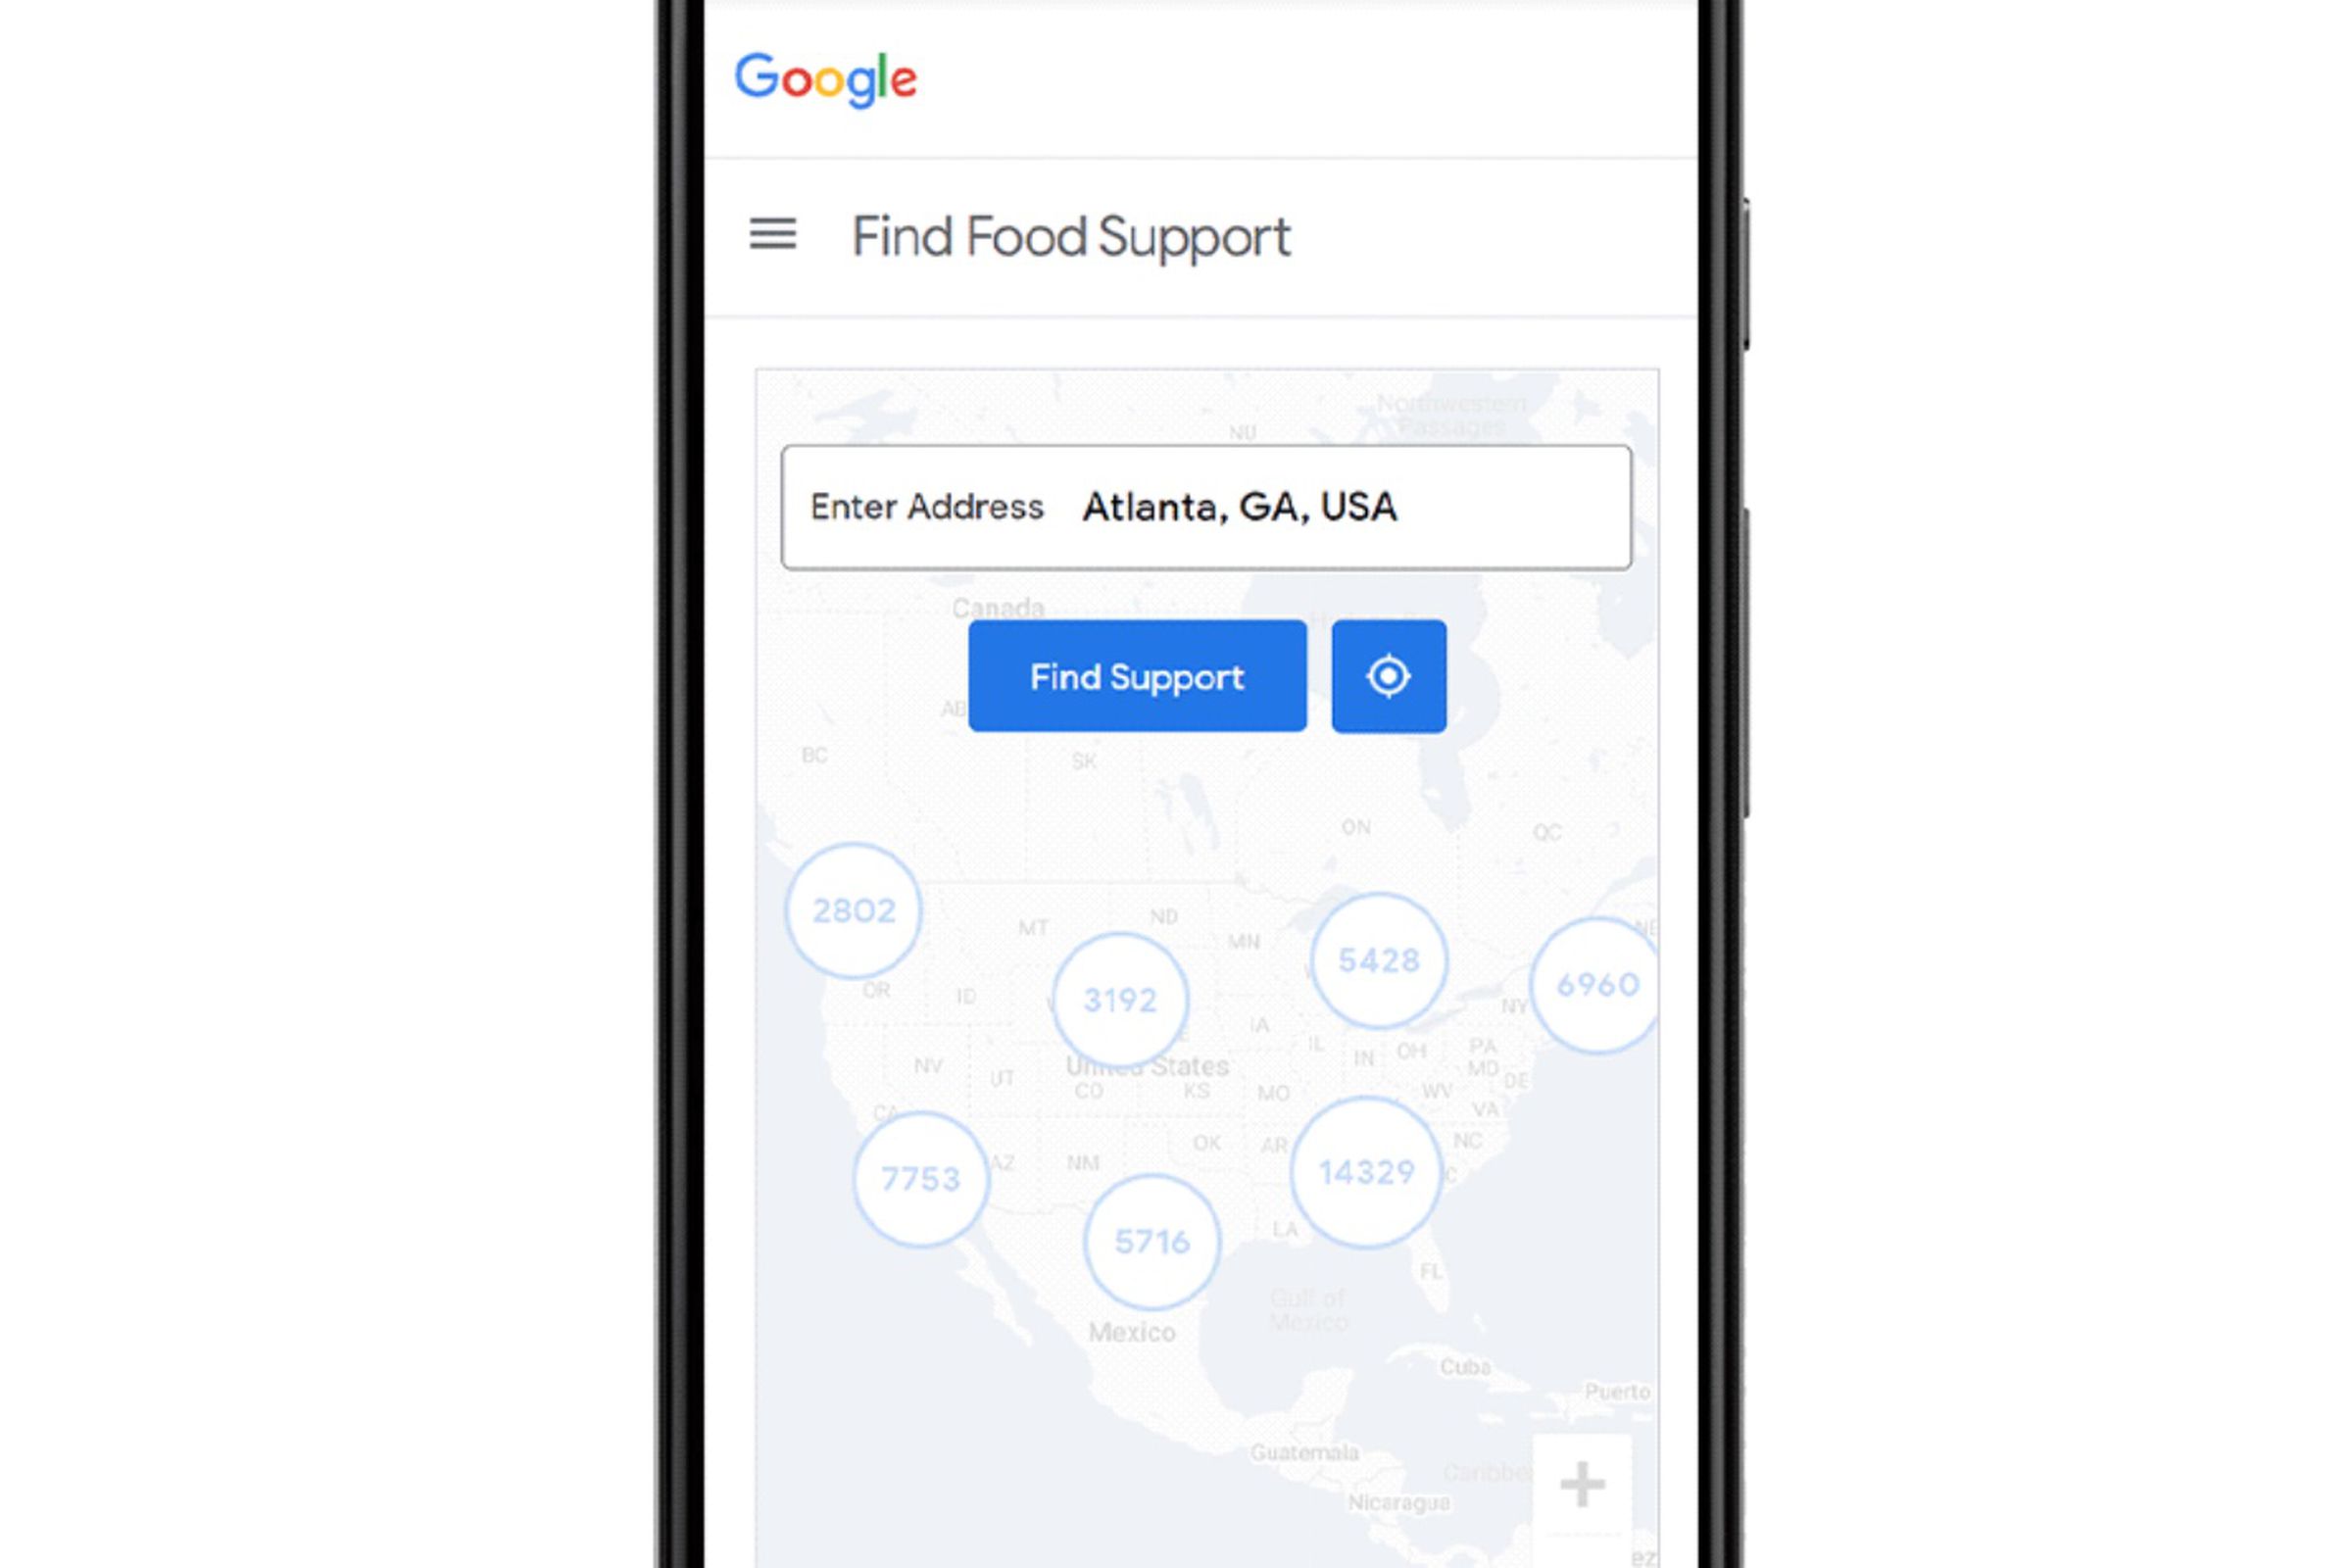 Google is working with non-profits to aggregate 90,000 locations with free food support across all 50 states .